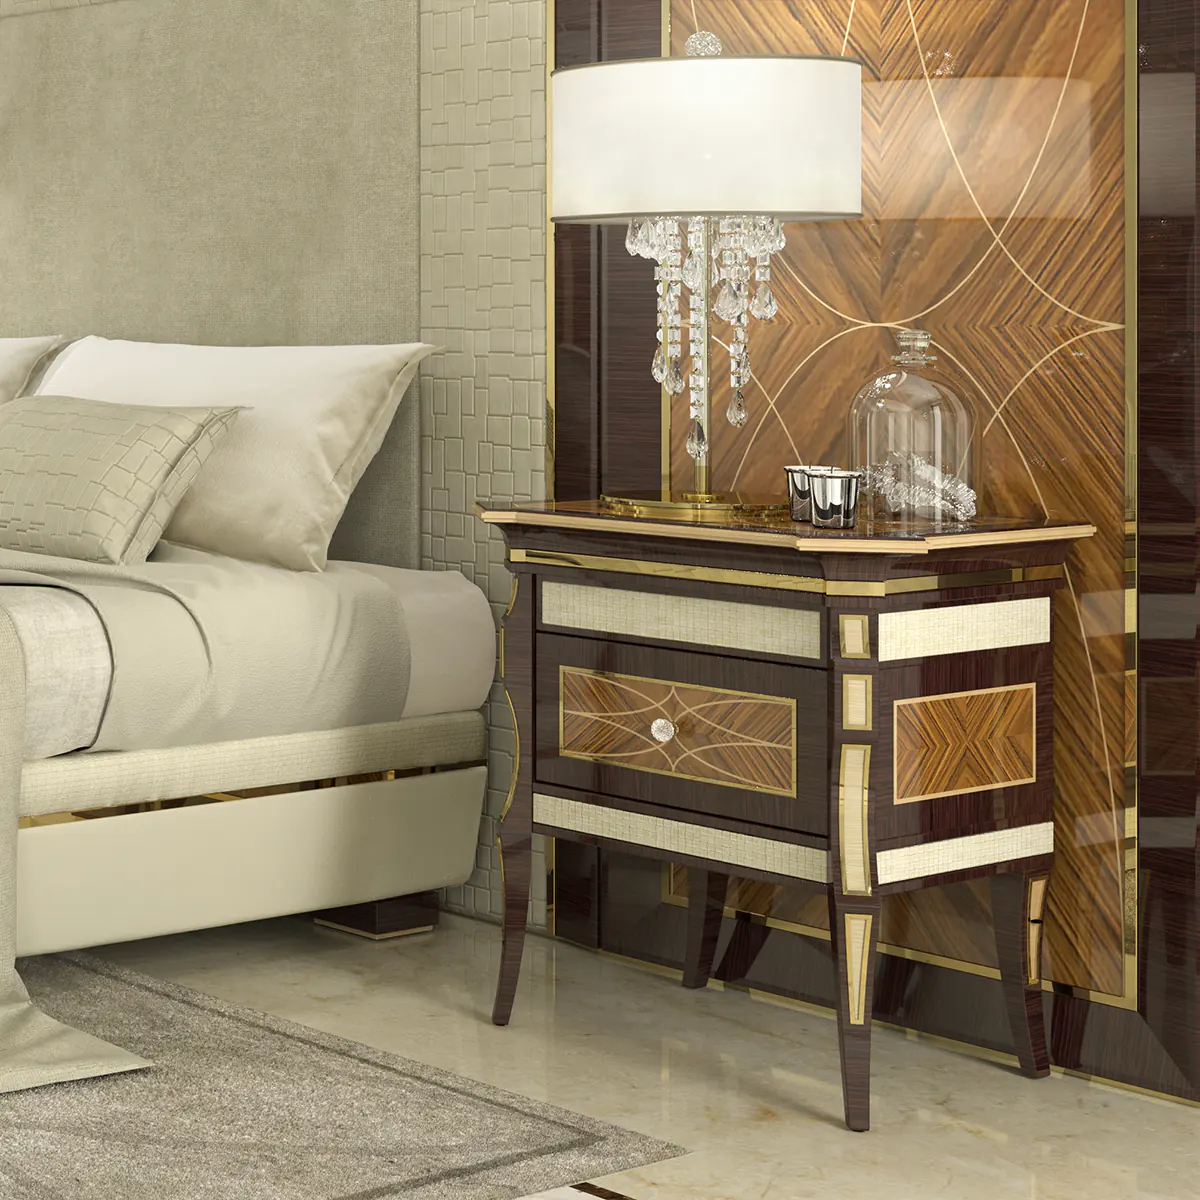 Monte Carlo LUX nightstand